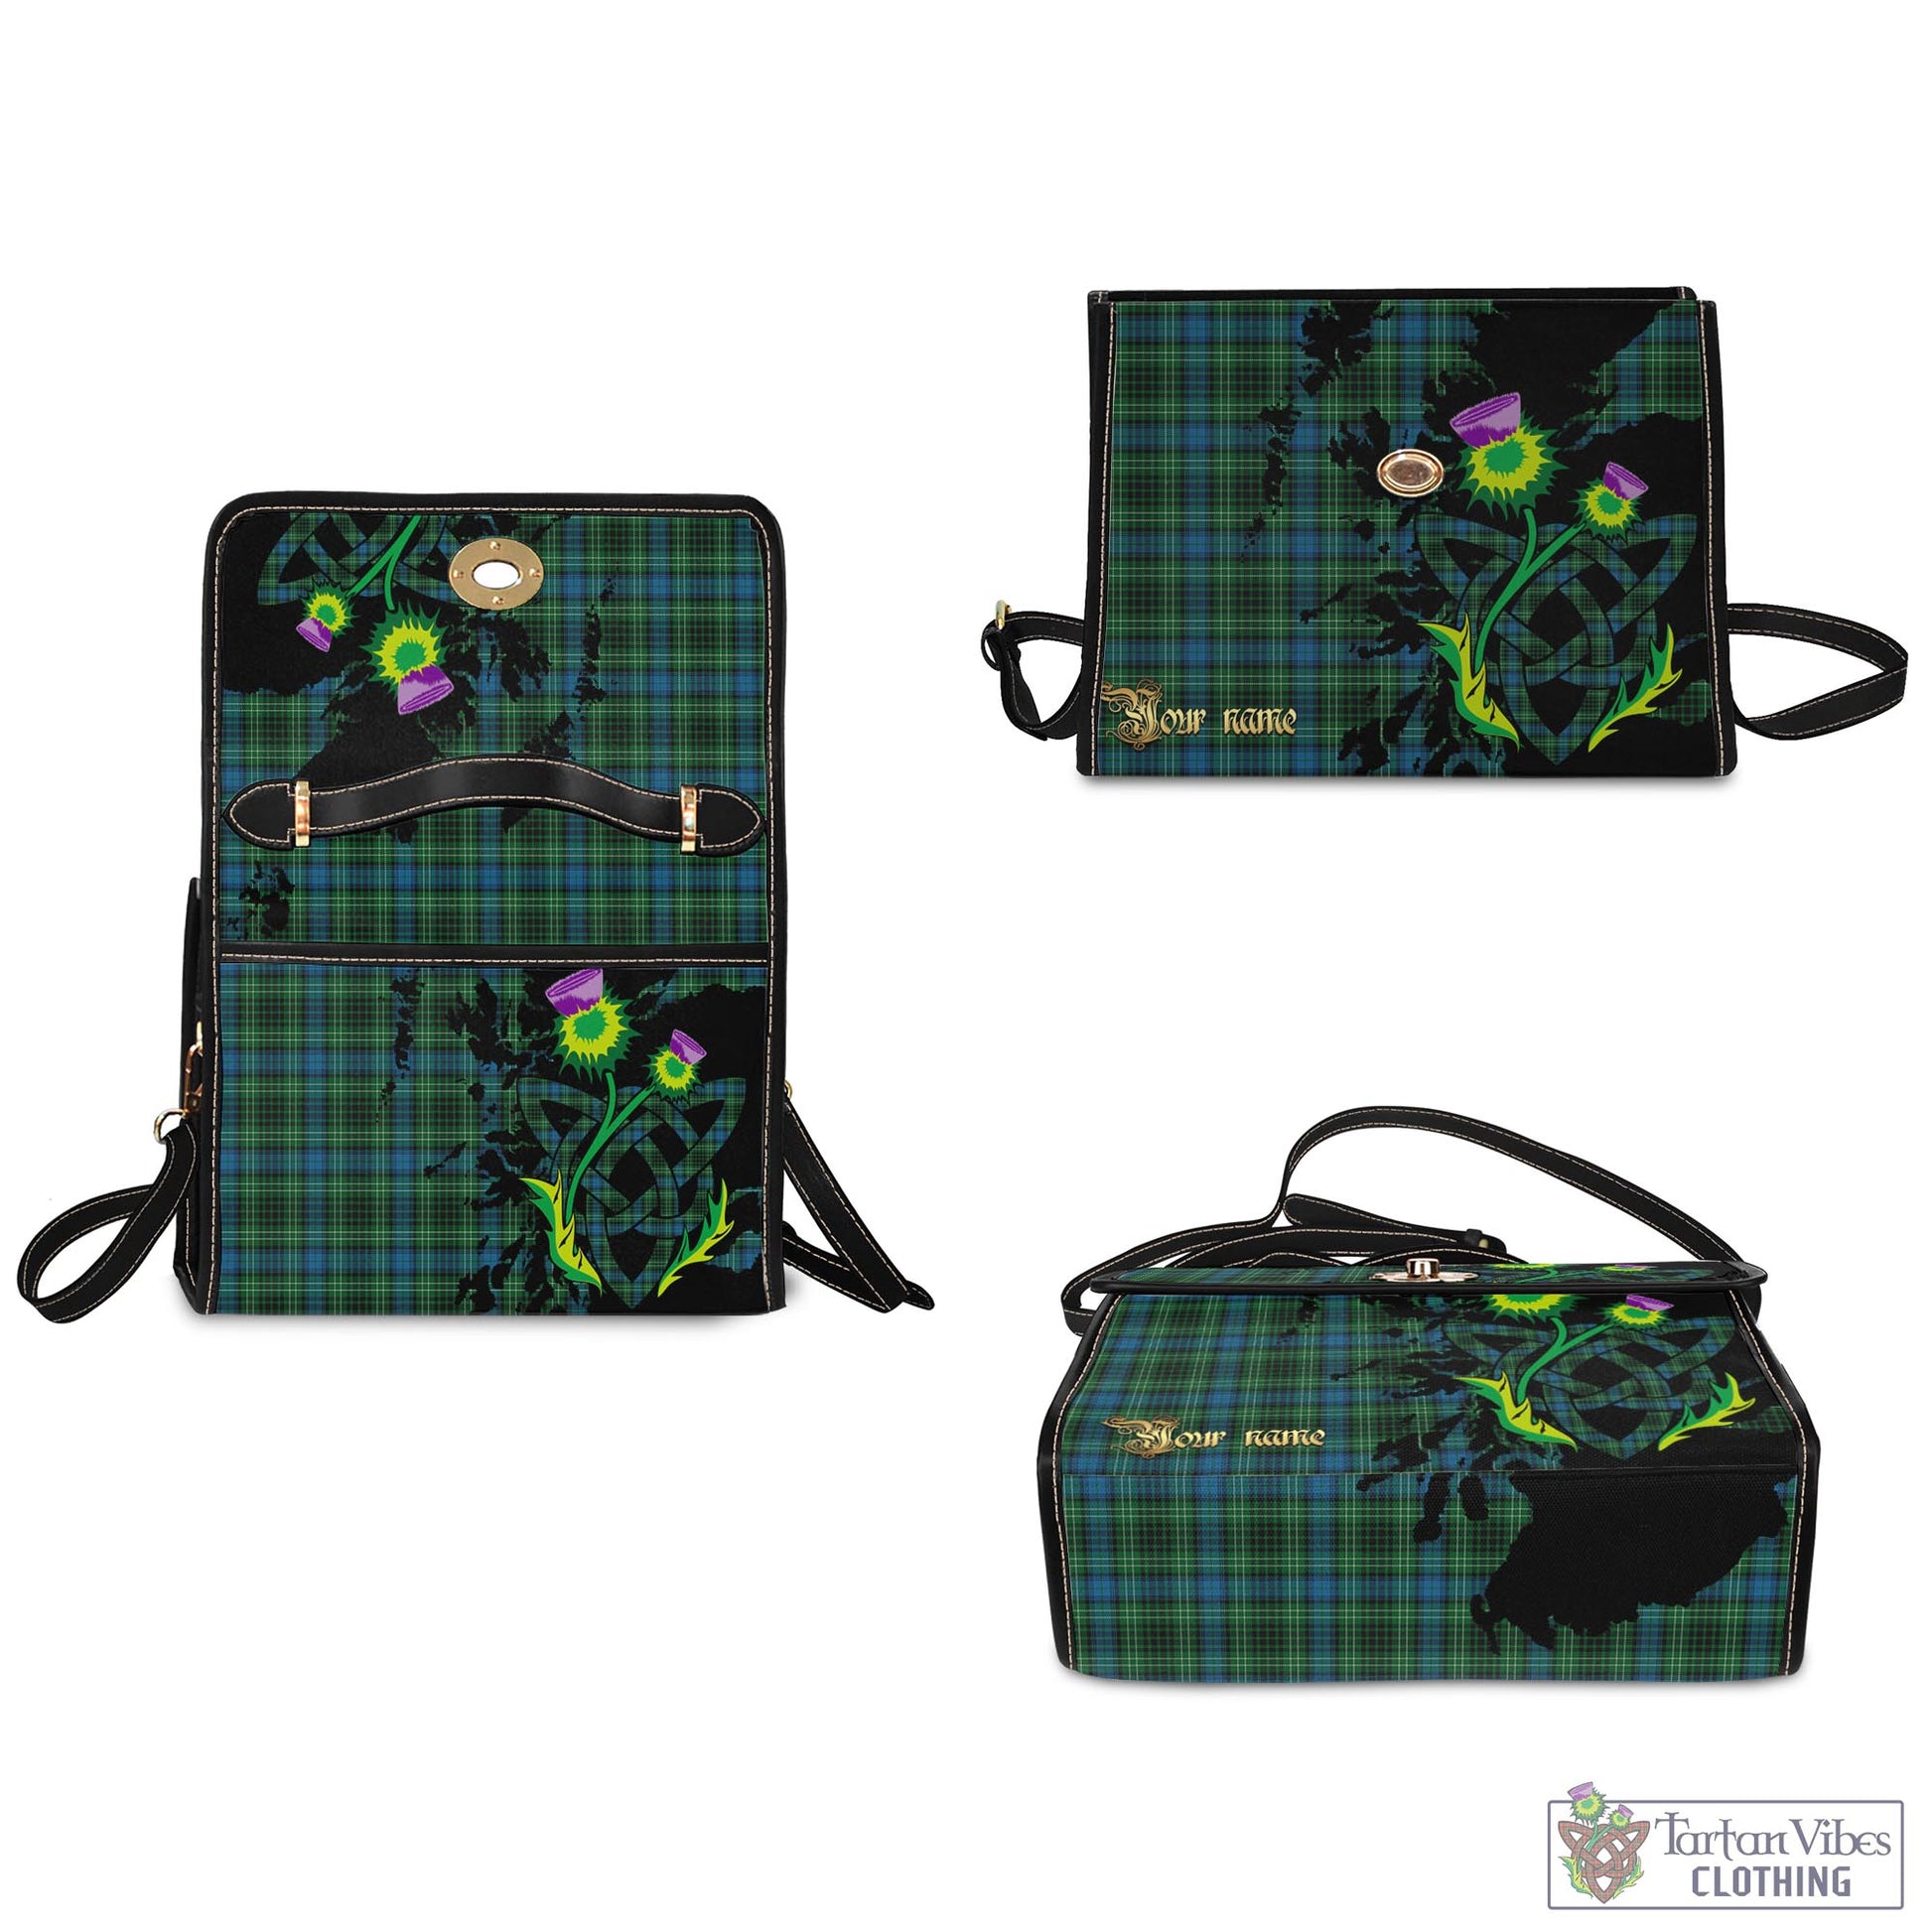 Tartan Vibes Clothing O'Connor Tartan Waterproof Canvas Bag with Scotland Map and Thistle Celtic Accents